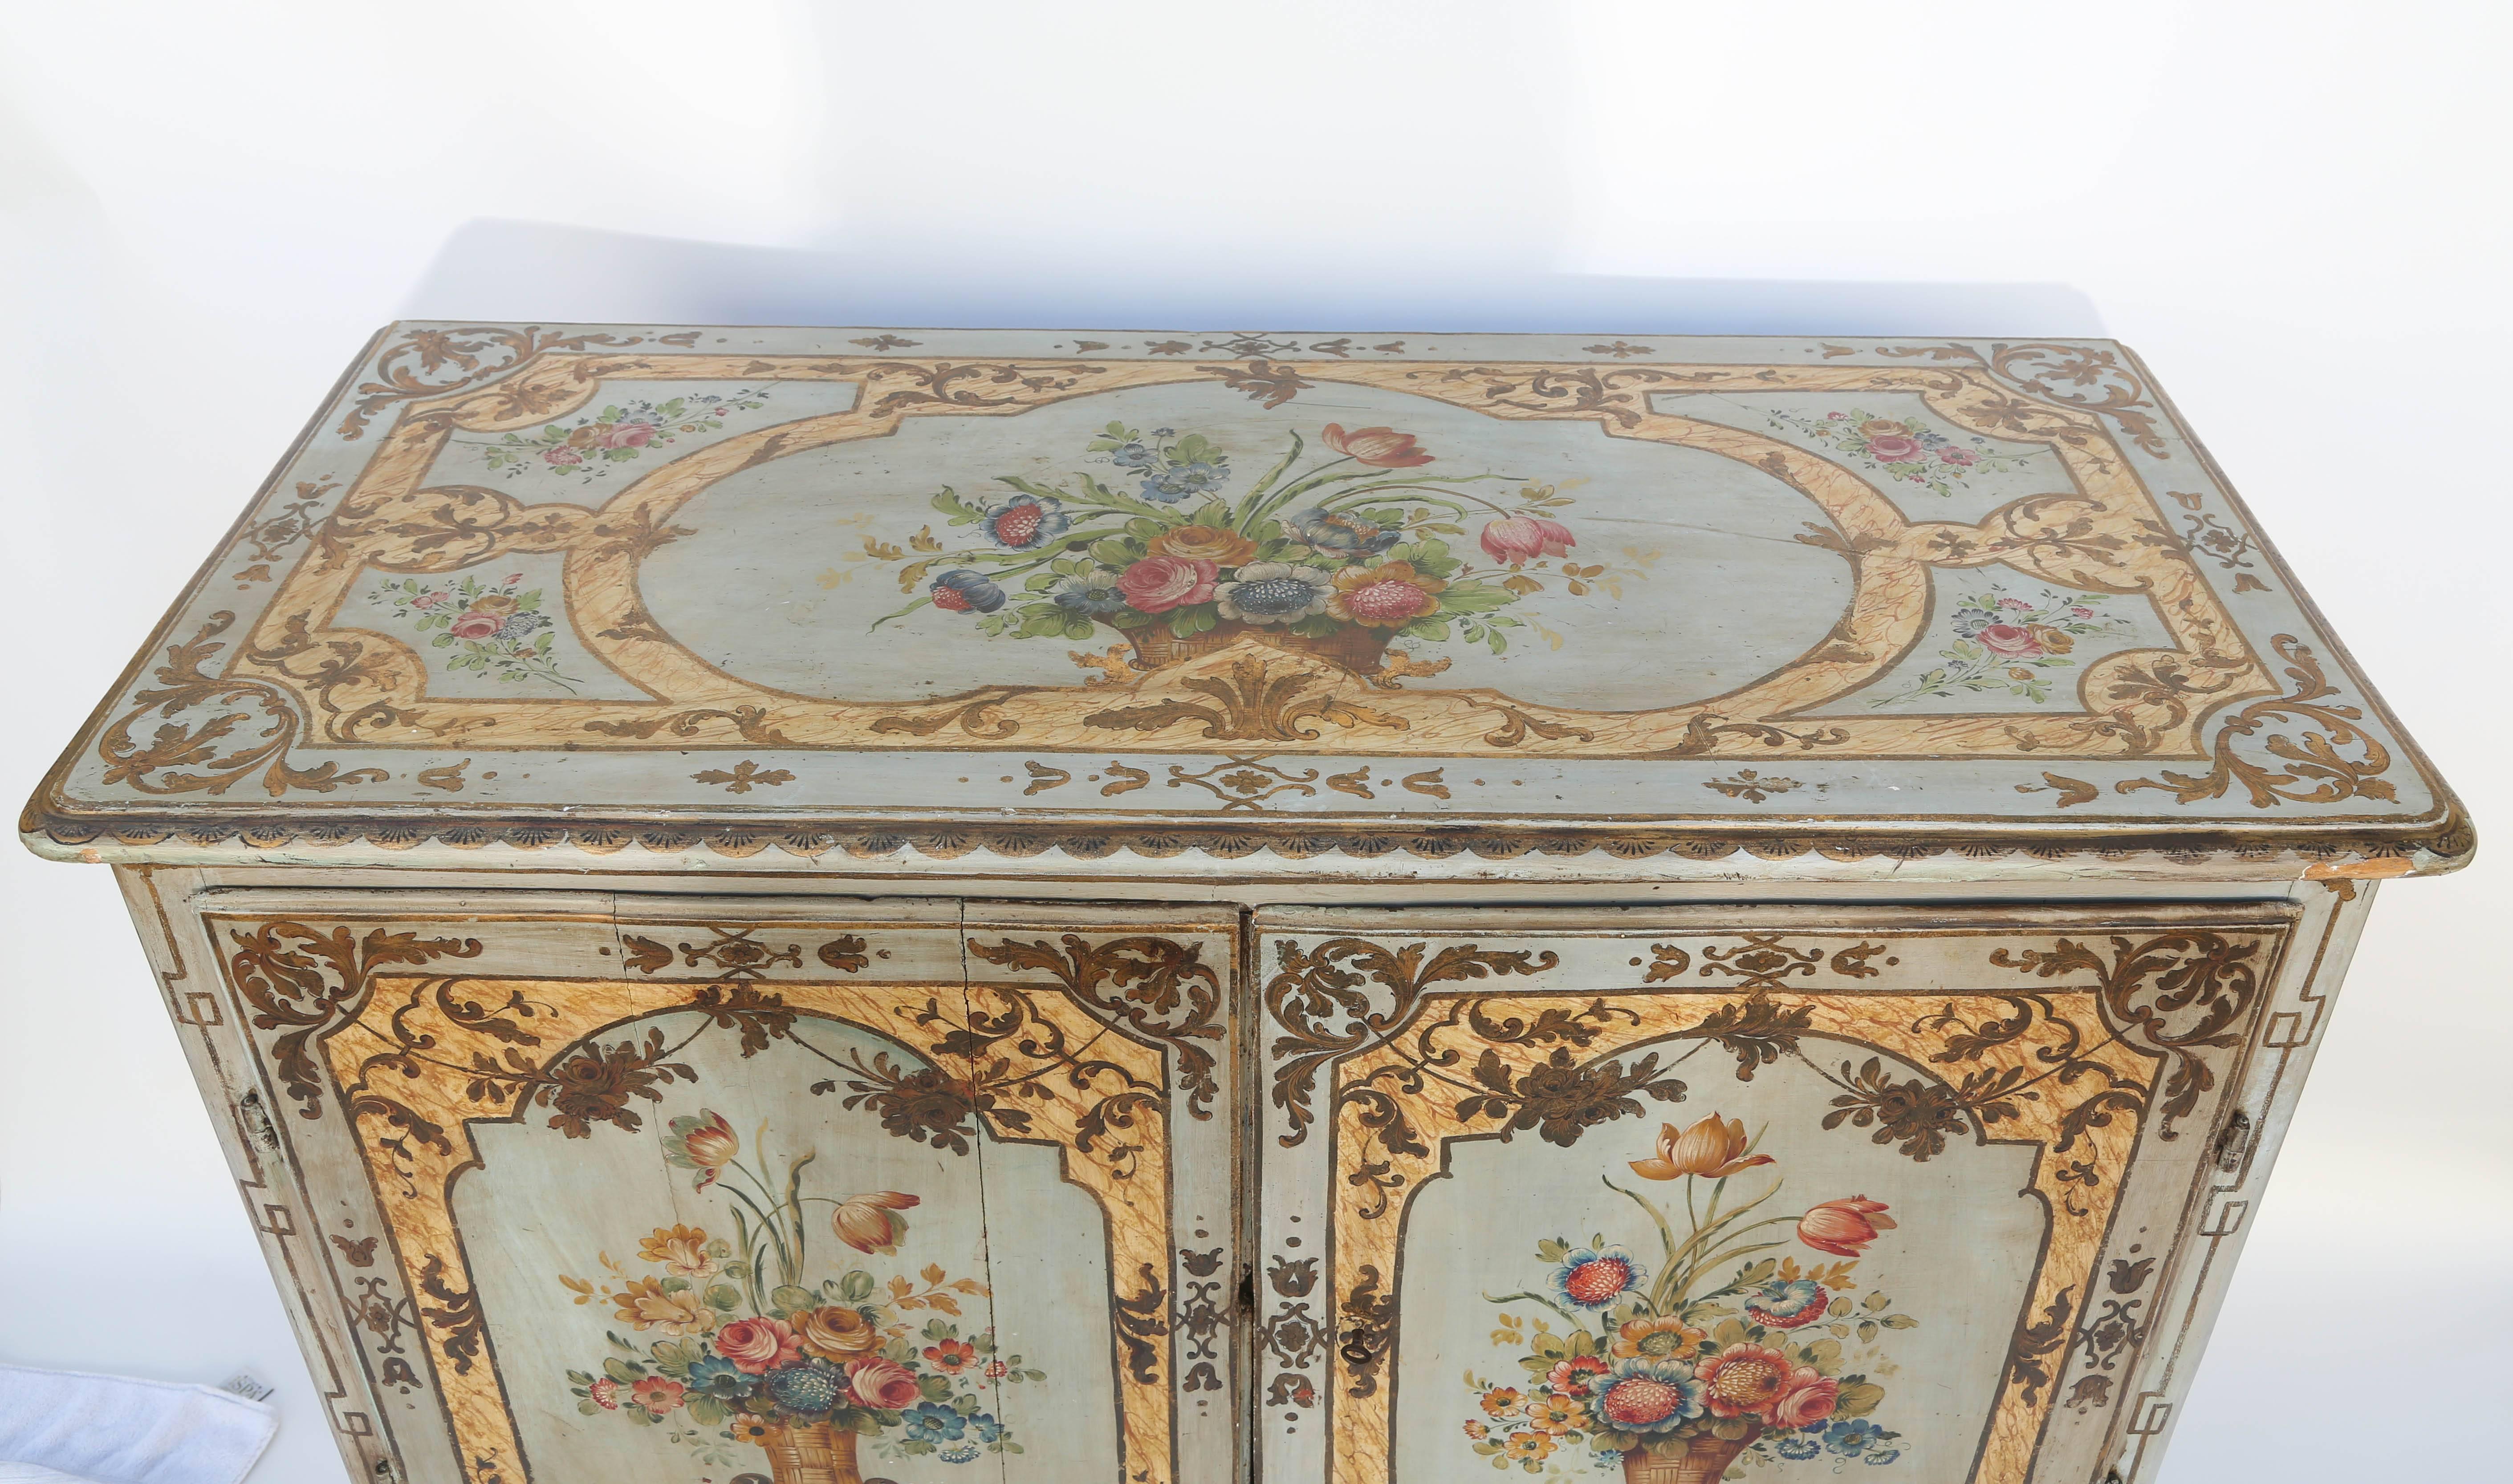 Exceptional 18th century, large-scale, two-door server, having a rectangular molded top over double cupboard doors, raised on tapering, square legs; exquisitely hand-painted in the late 19th century.

Stock ID: D9411